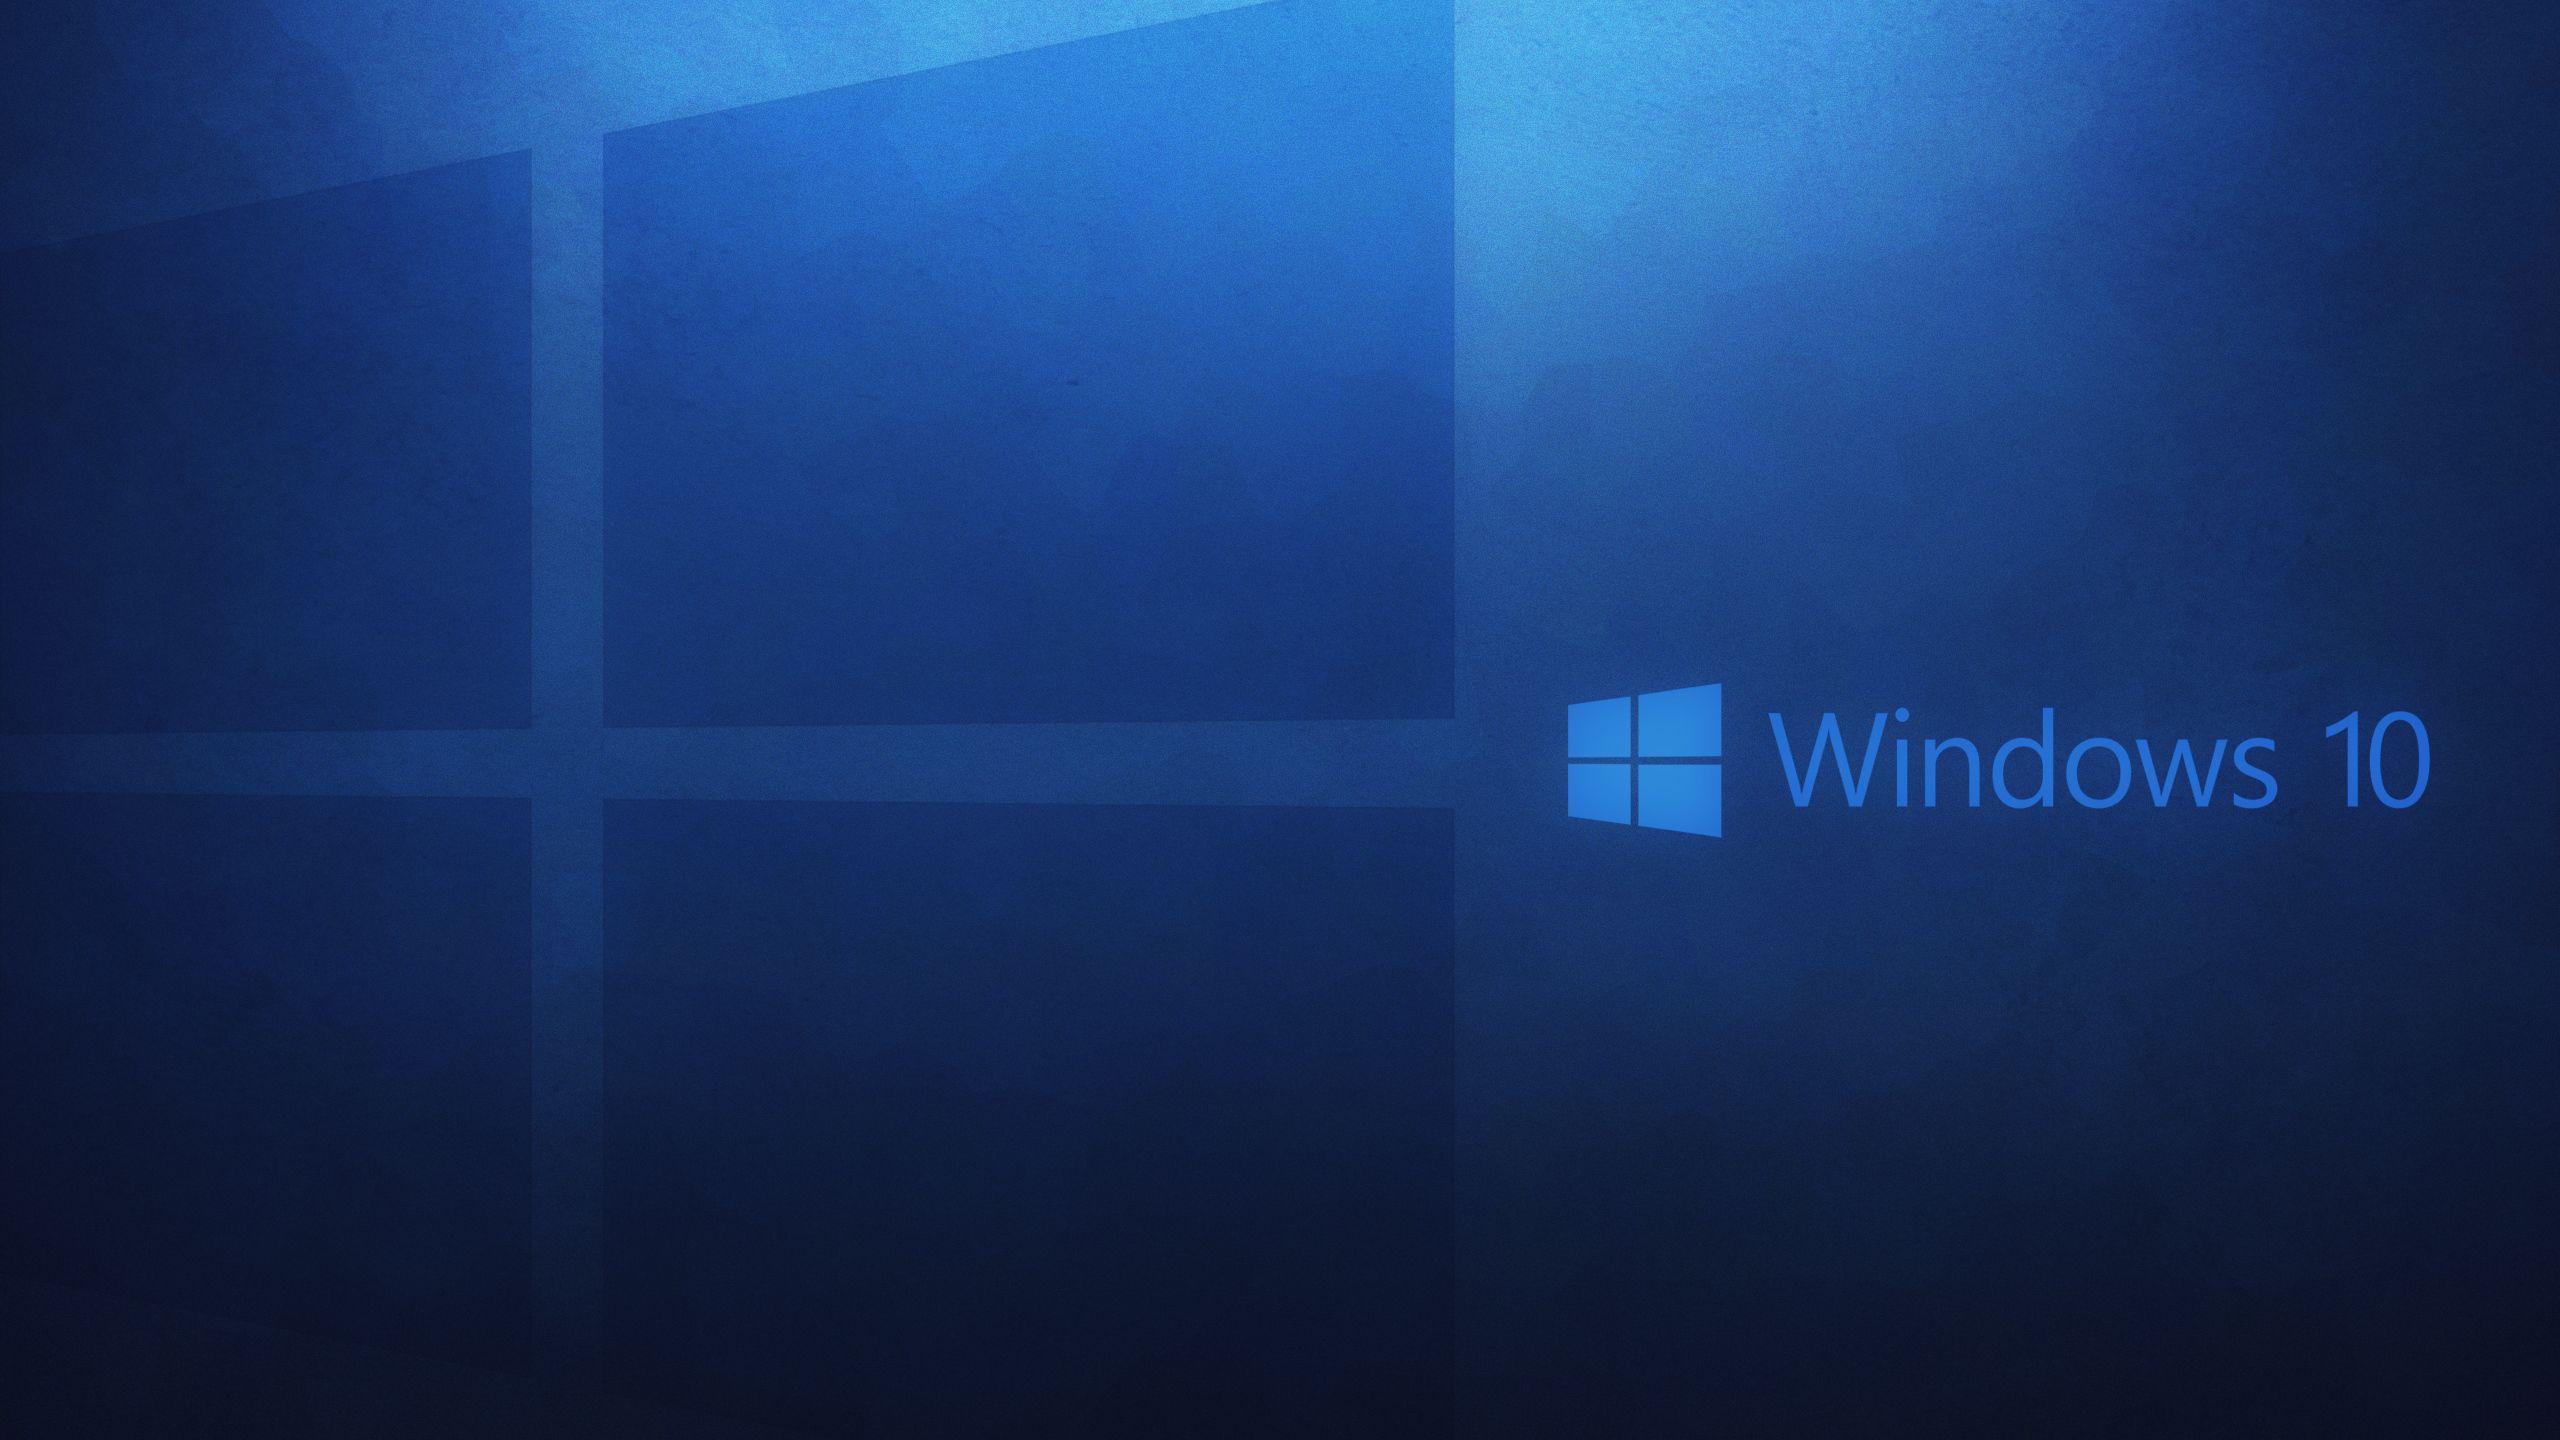 Download Wallpapers 2560x1440 Windows 10, Microsoft, Operating system